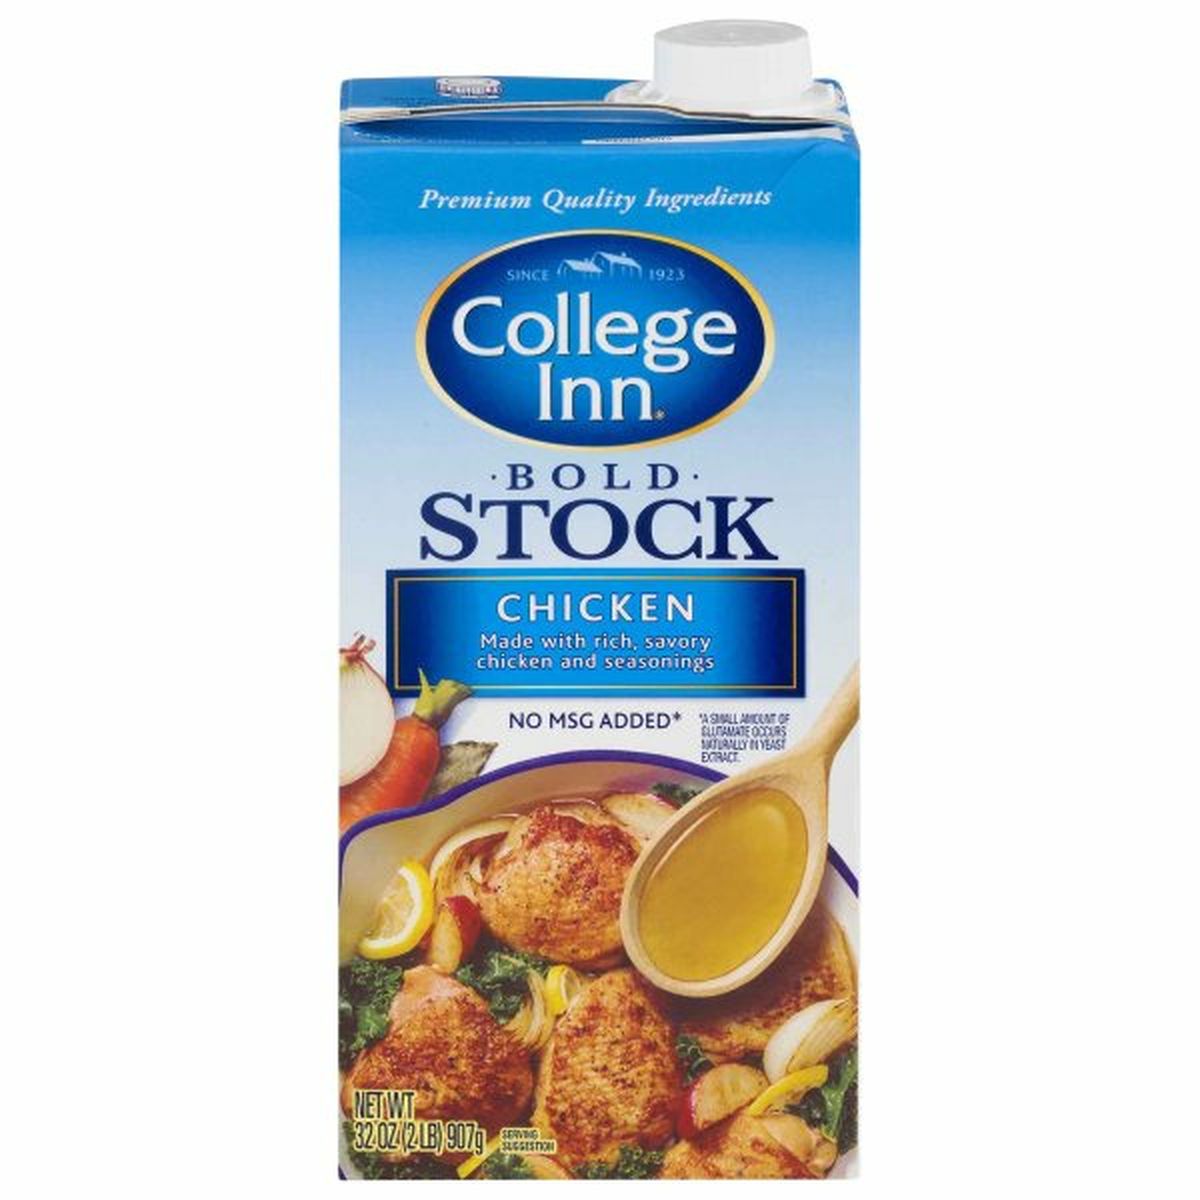 Calories in College Inn Stock, Chicken, Bold